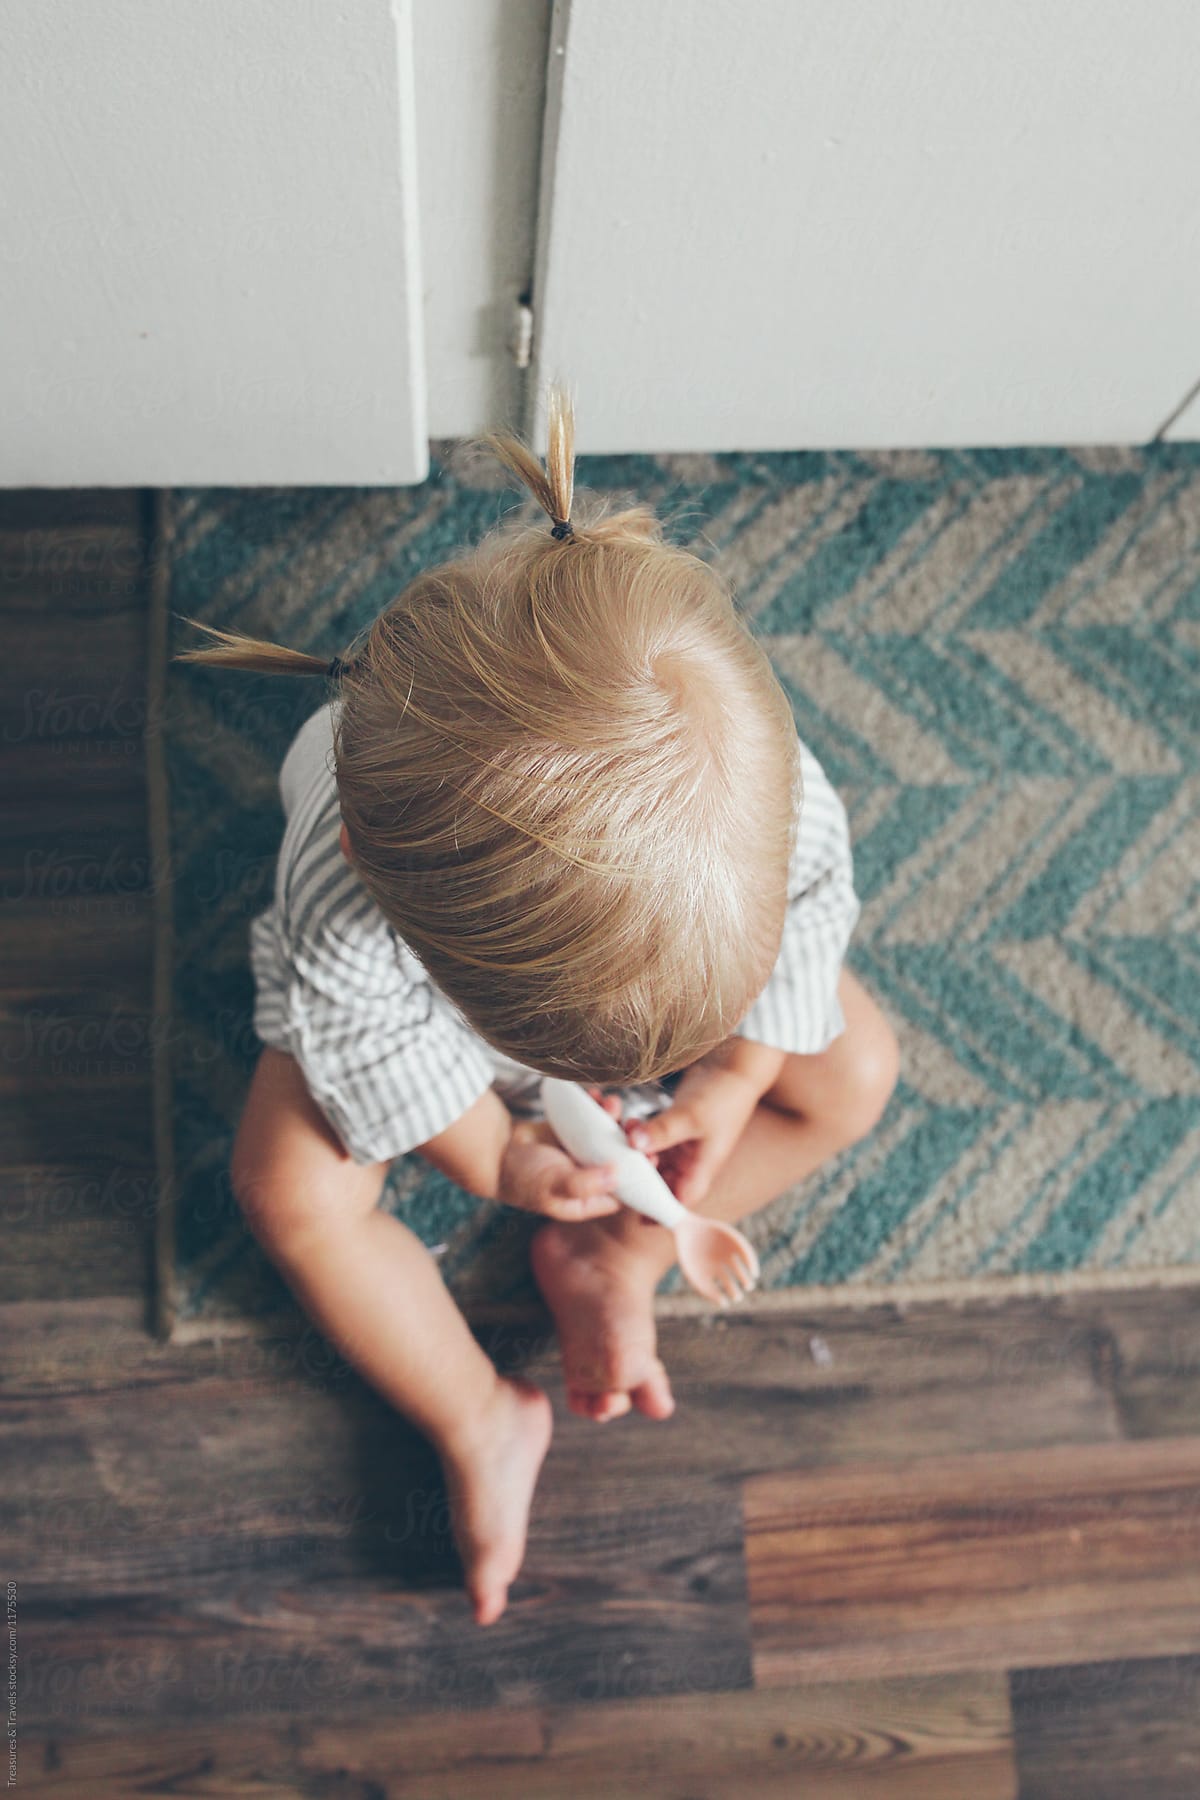 Toddler sitting on kitchen floor holding a spoon